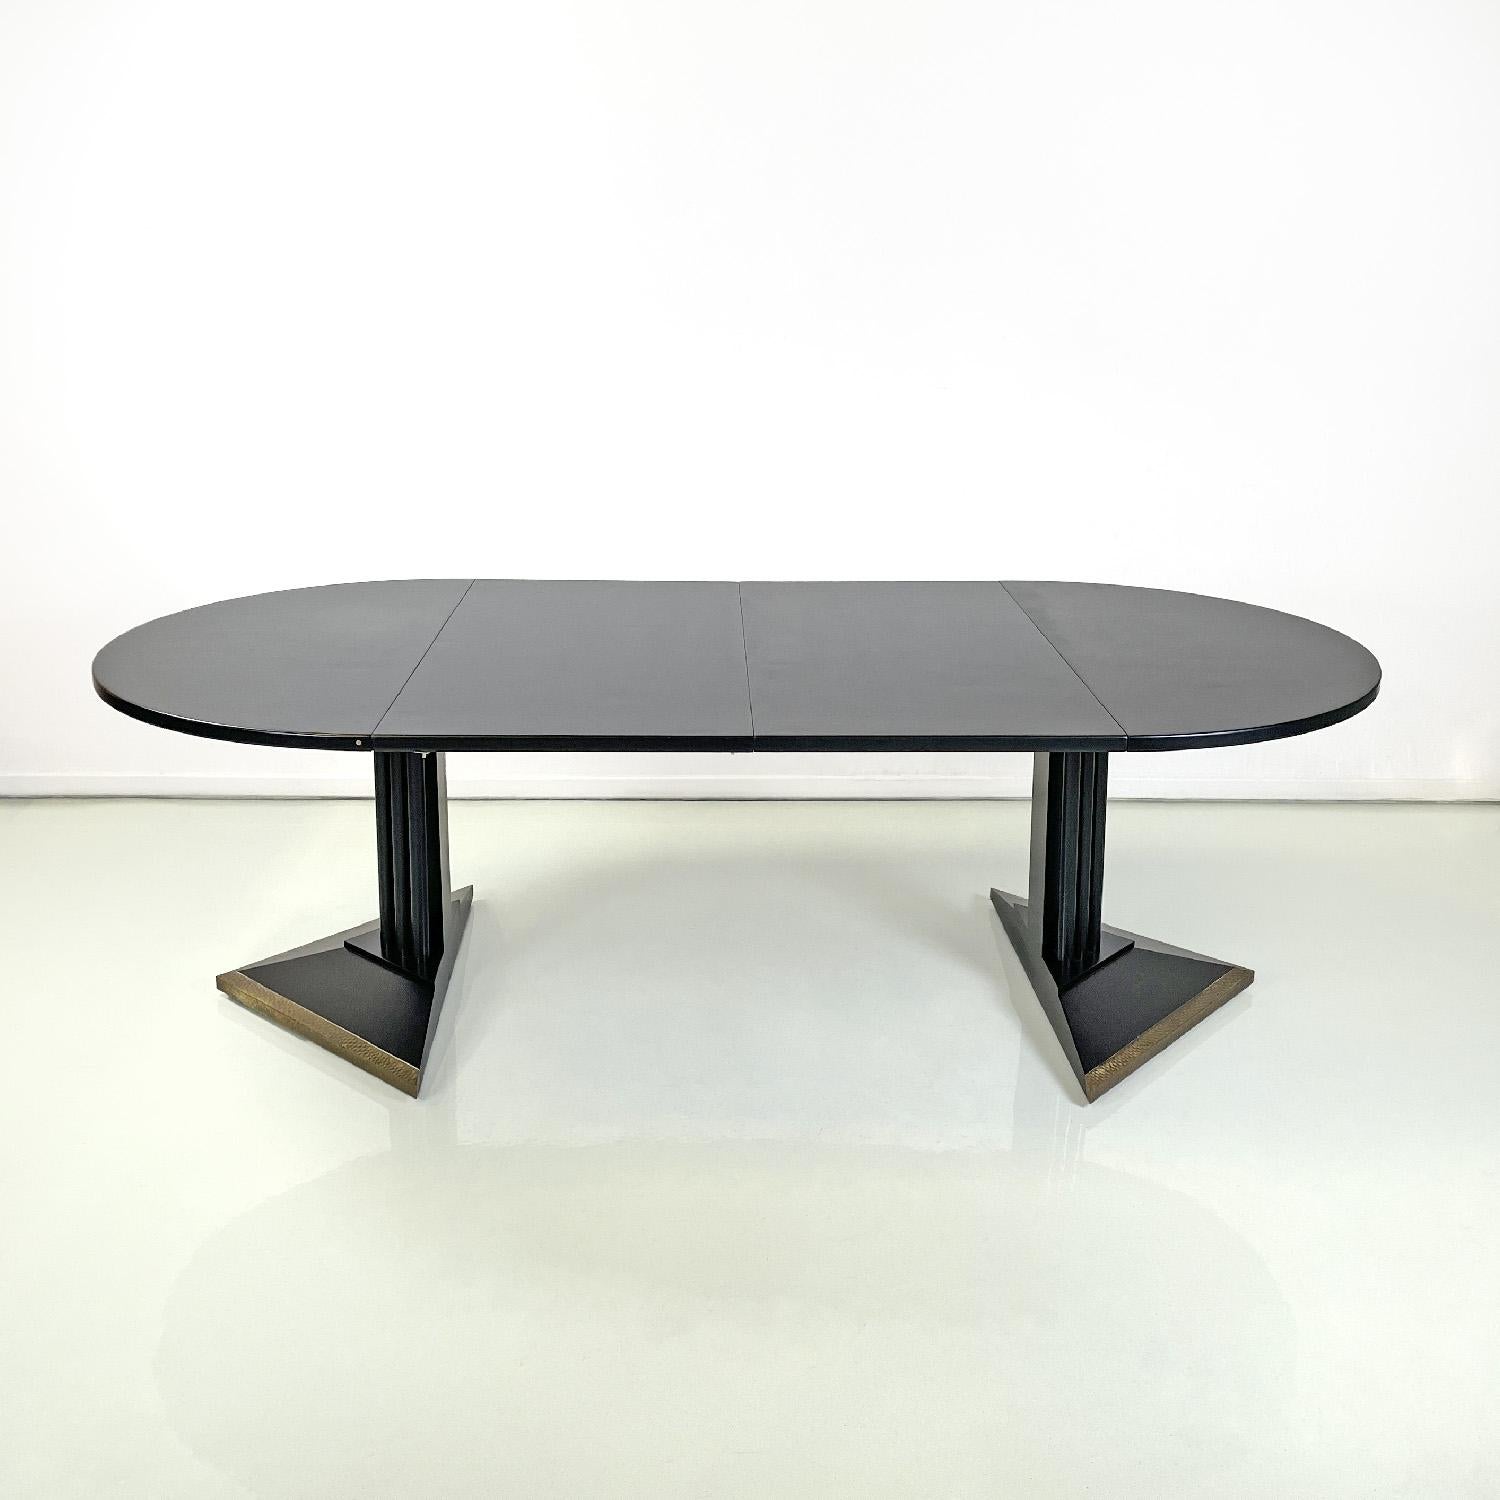 Italian modern extendable black and gold dining table by Thonet, 1990s For Sale 3